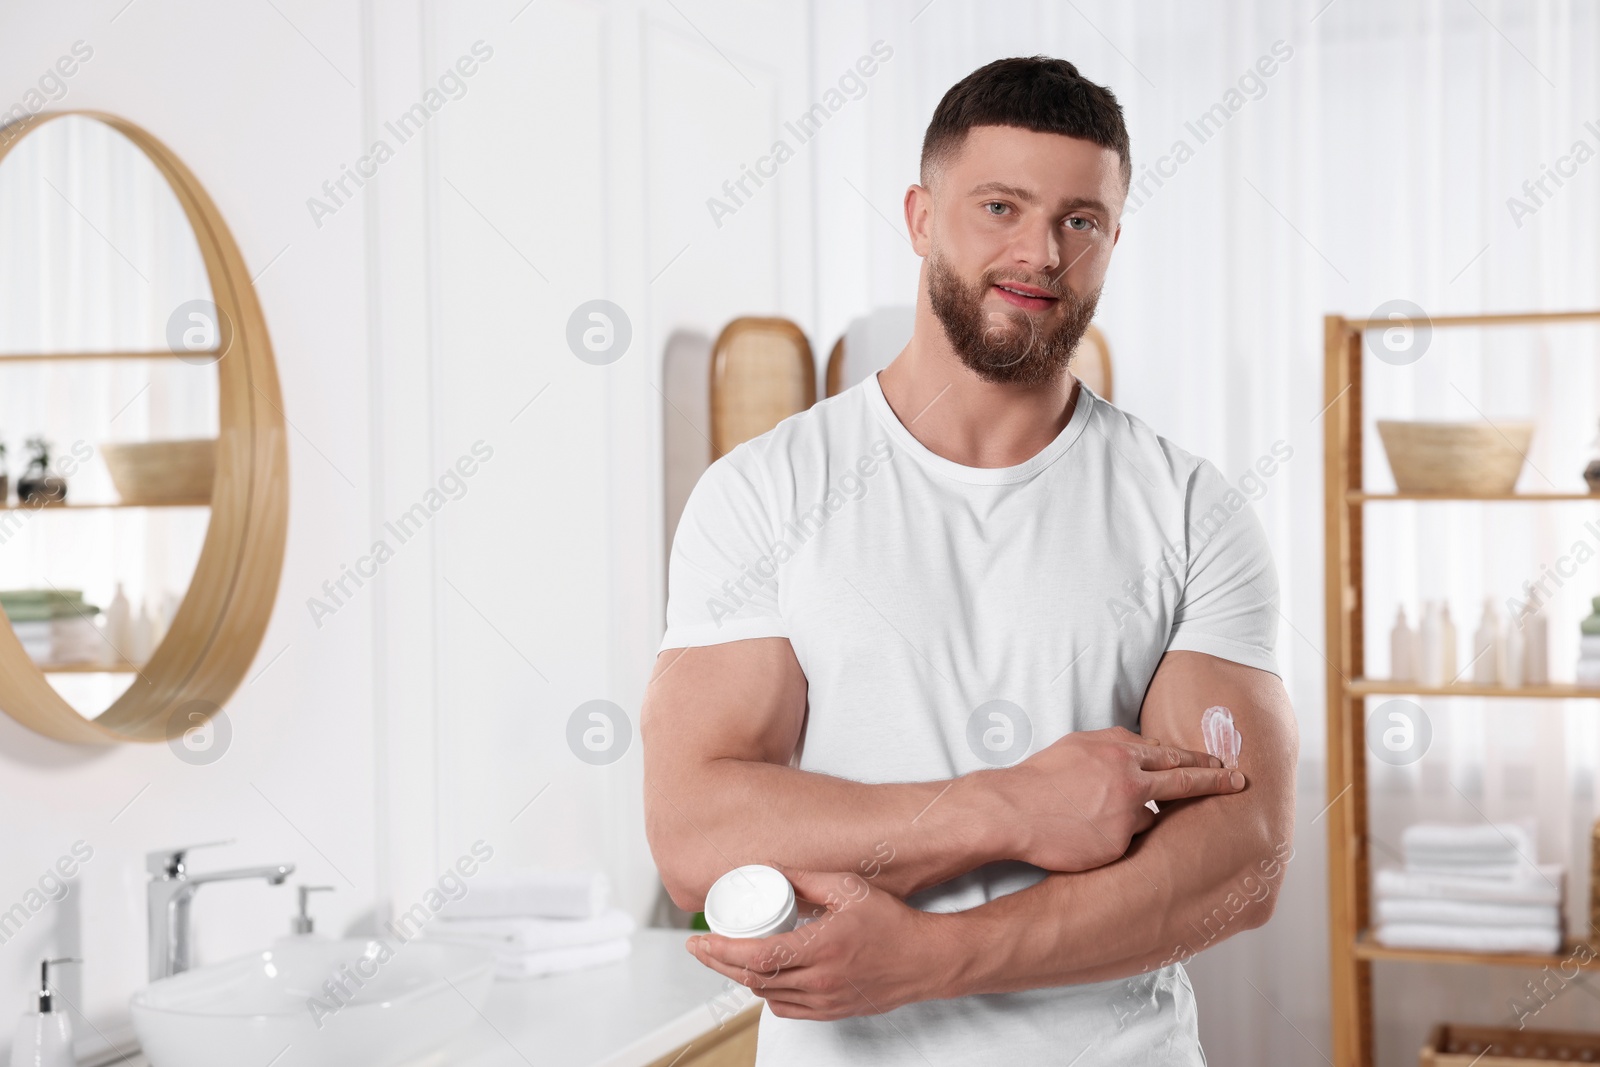 Photo of Handsome man applying body cream onto his arm in bathroom. Space for text